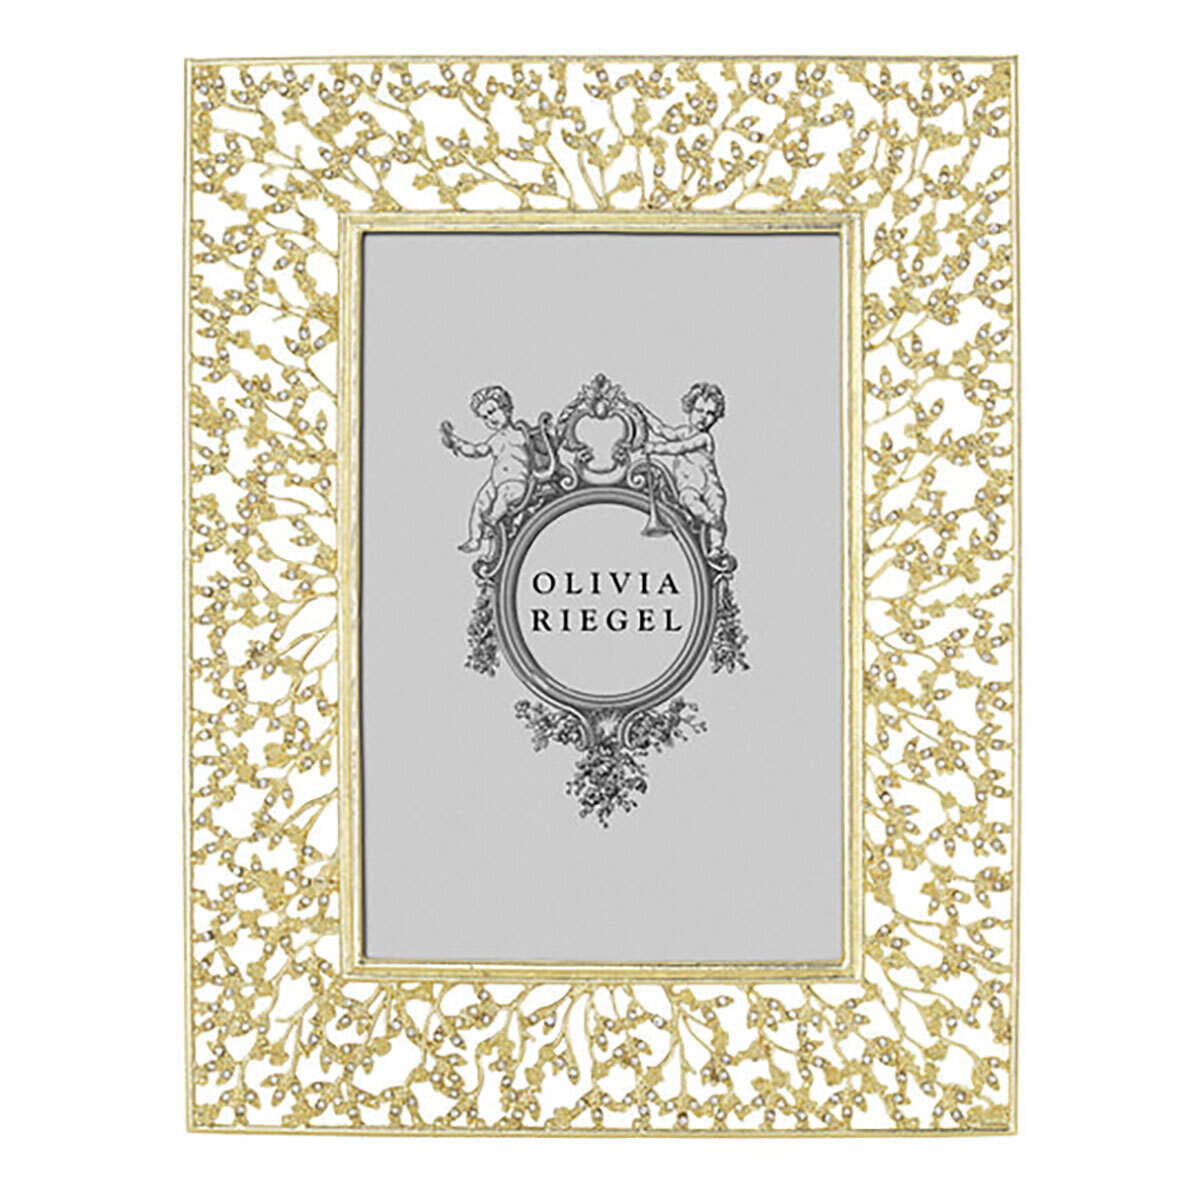 Olivia Riegel Gold Isadora 5" x 7" Picture Frame RT2362